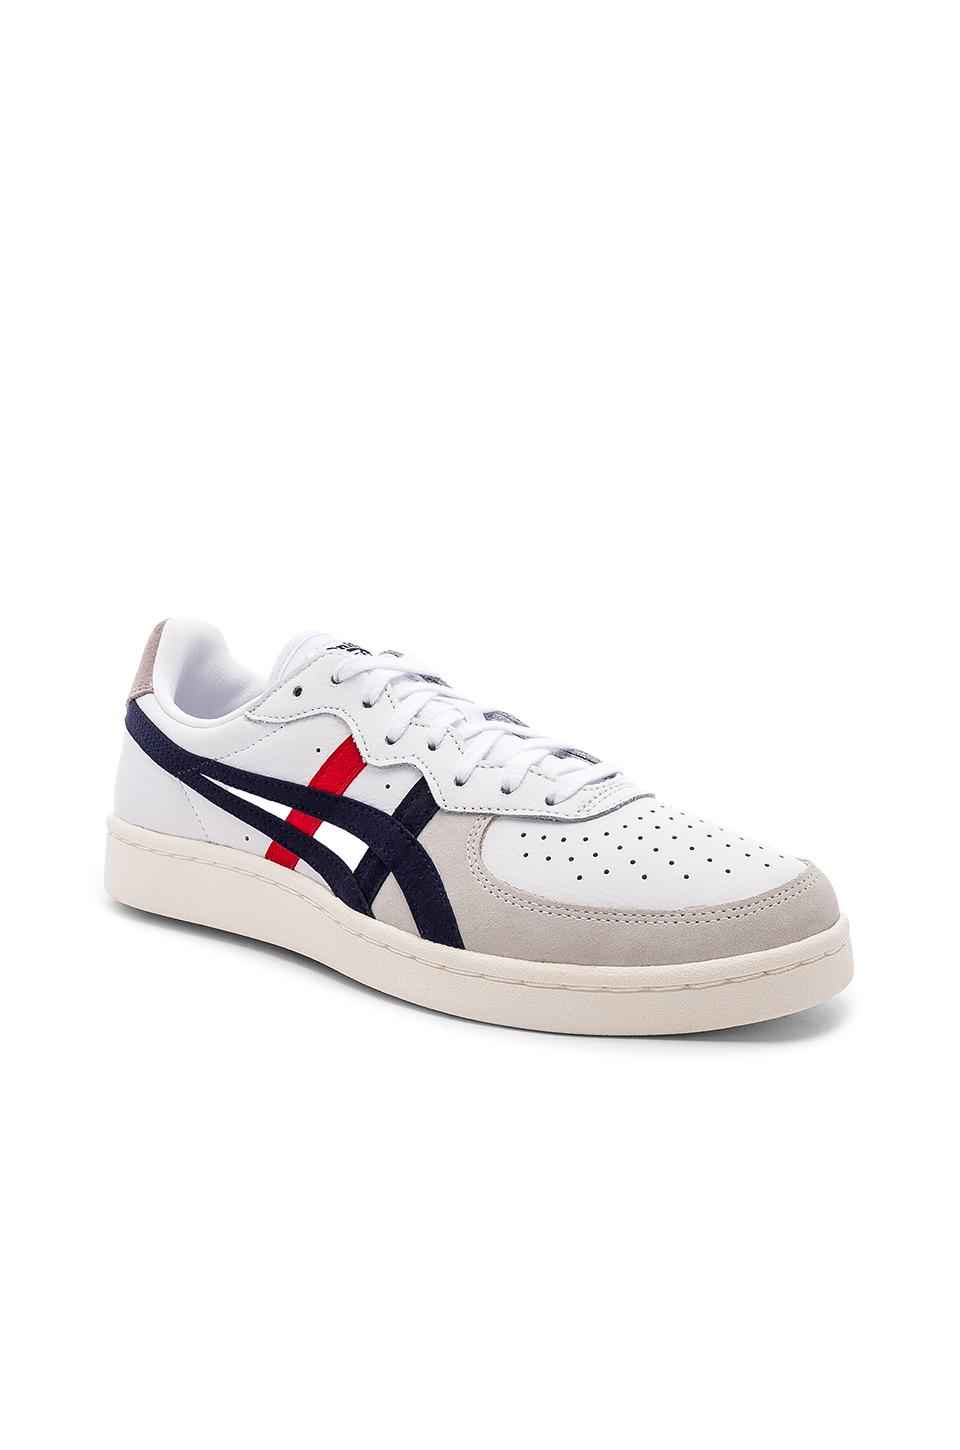 Onitsuka Tiger Gsm White Peacoat Germany, SAVE 50% - aveclumiere.com